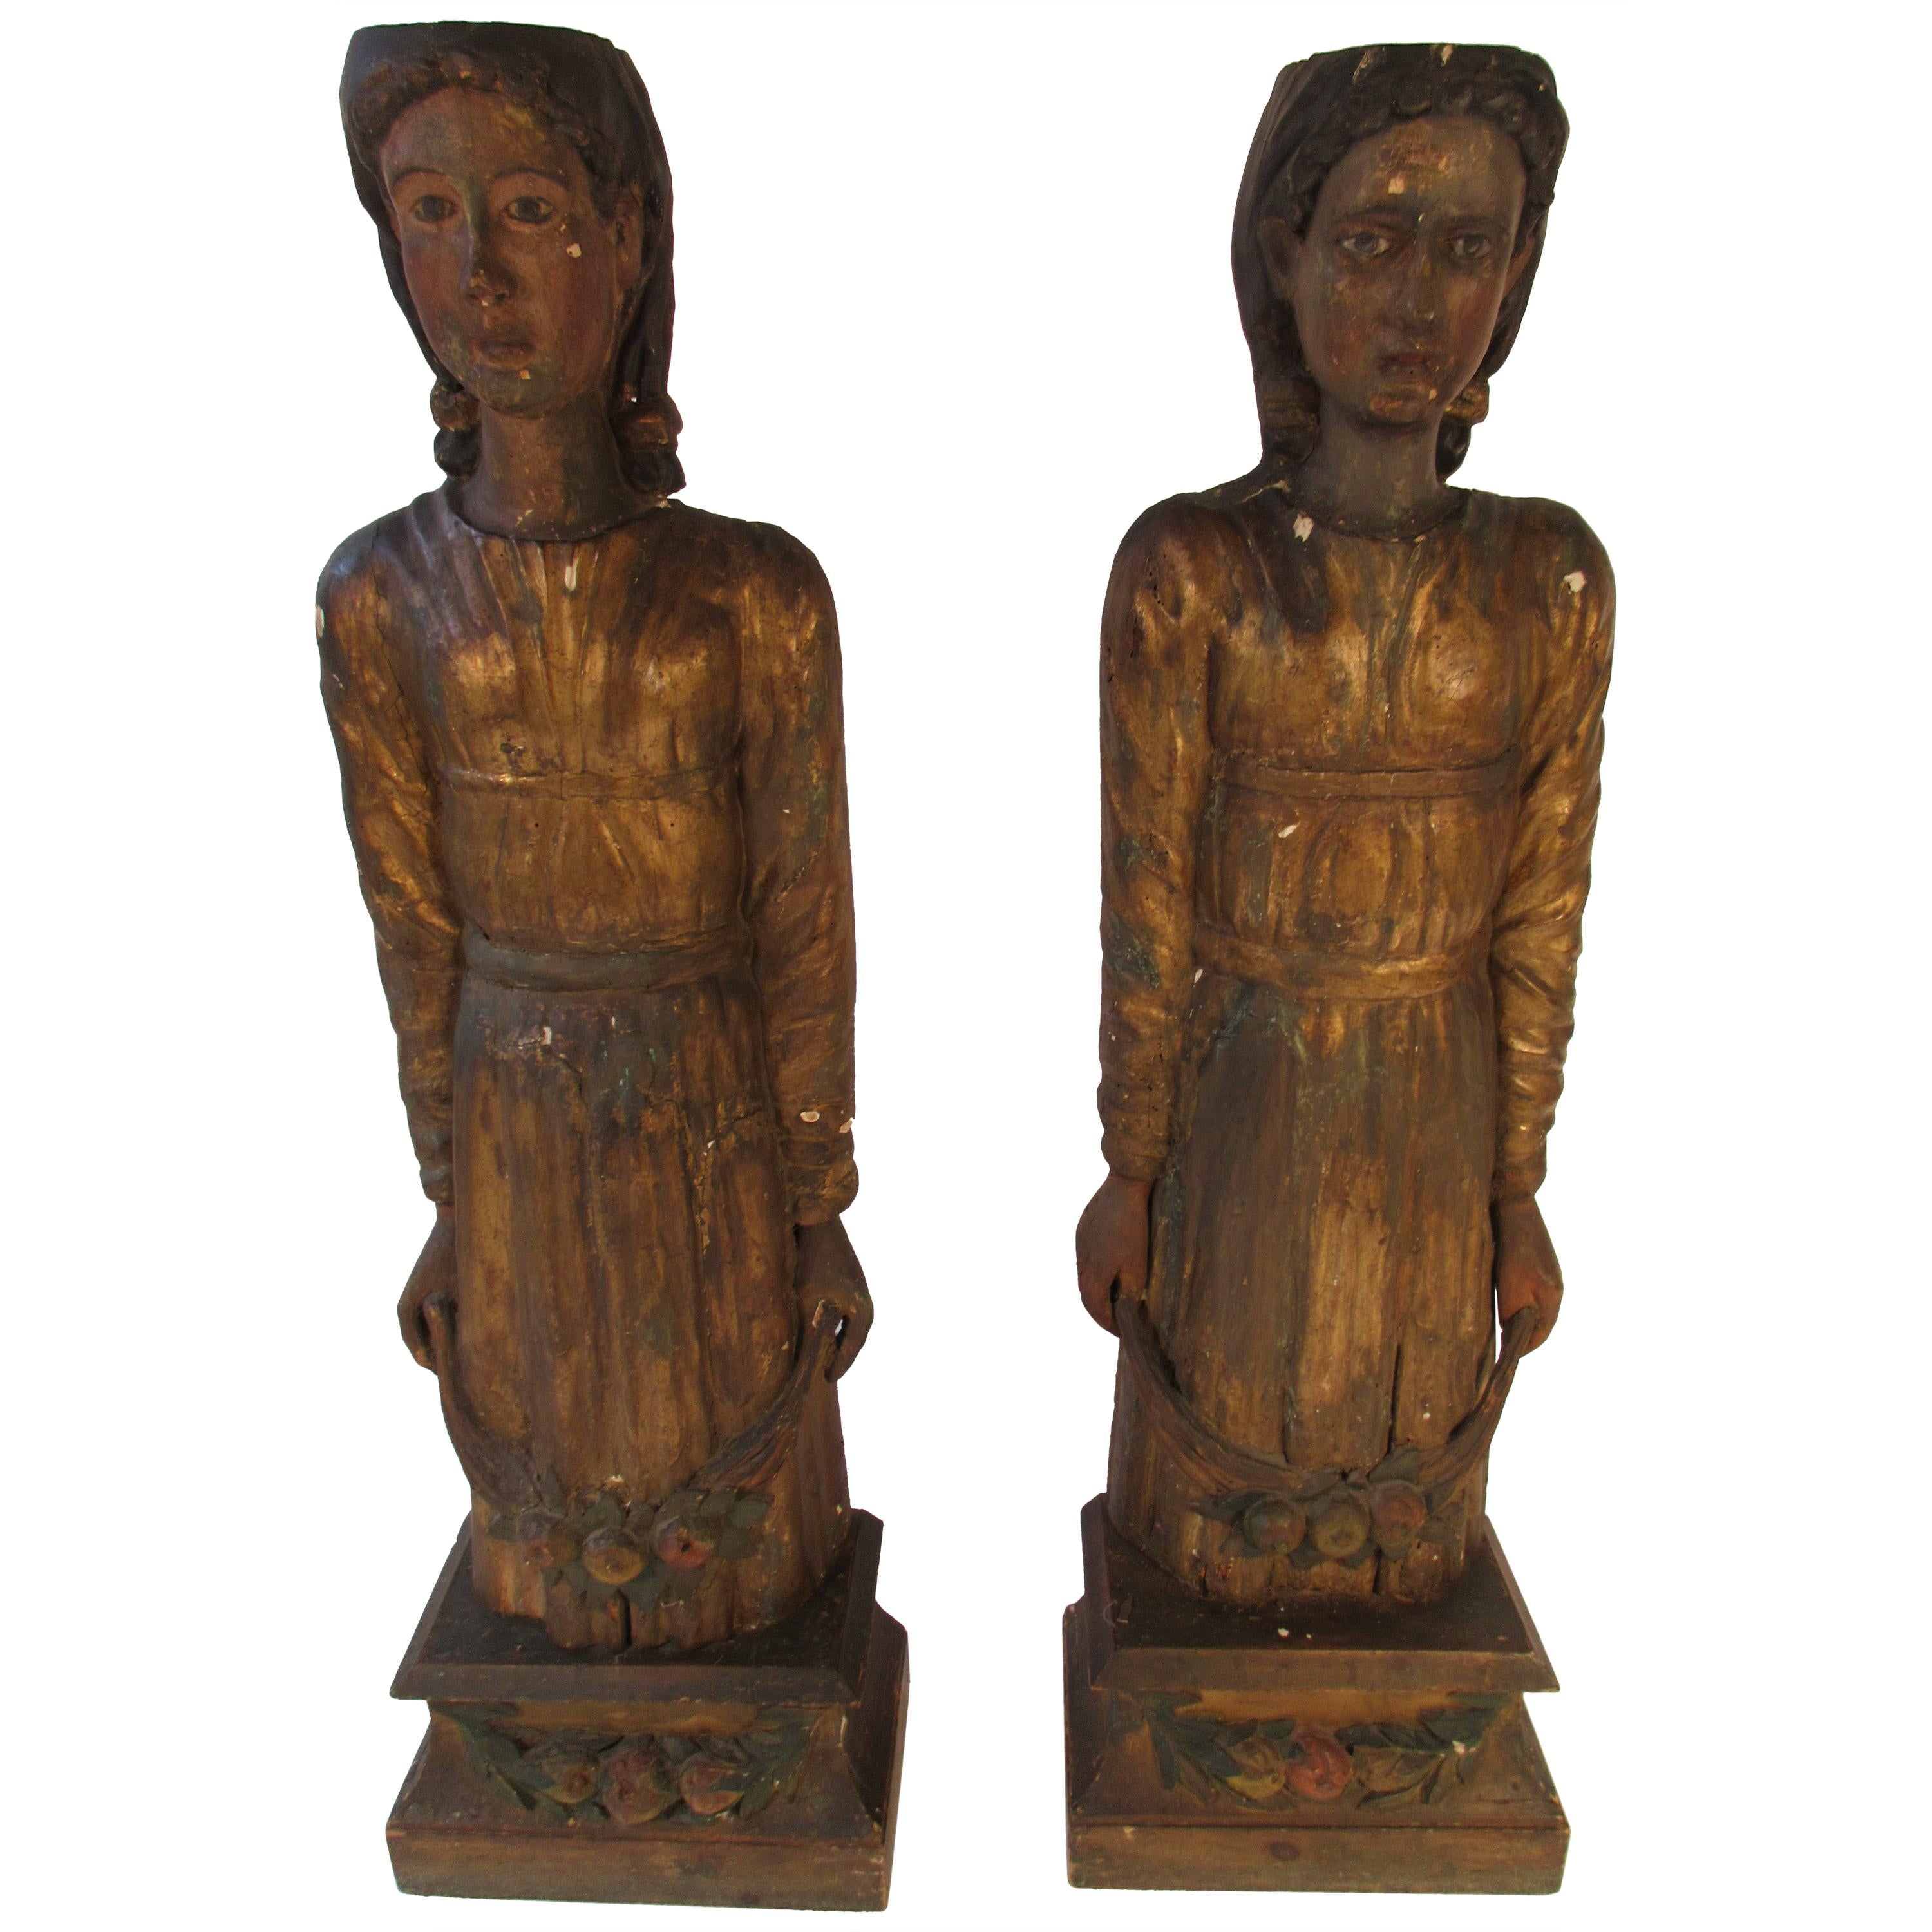 Pair of Large 1840s Venetian Wood Figures from an Italian Theatre For Sale